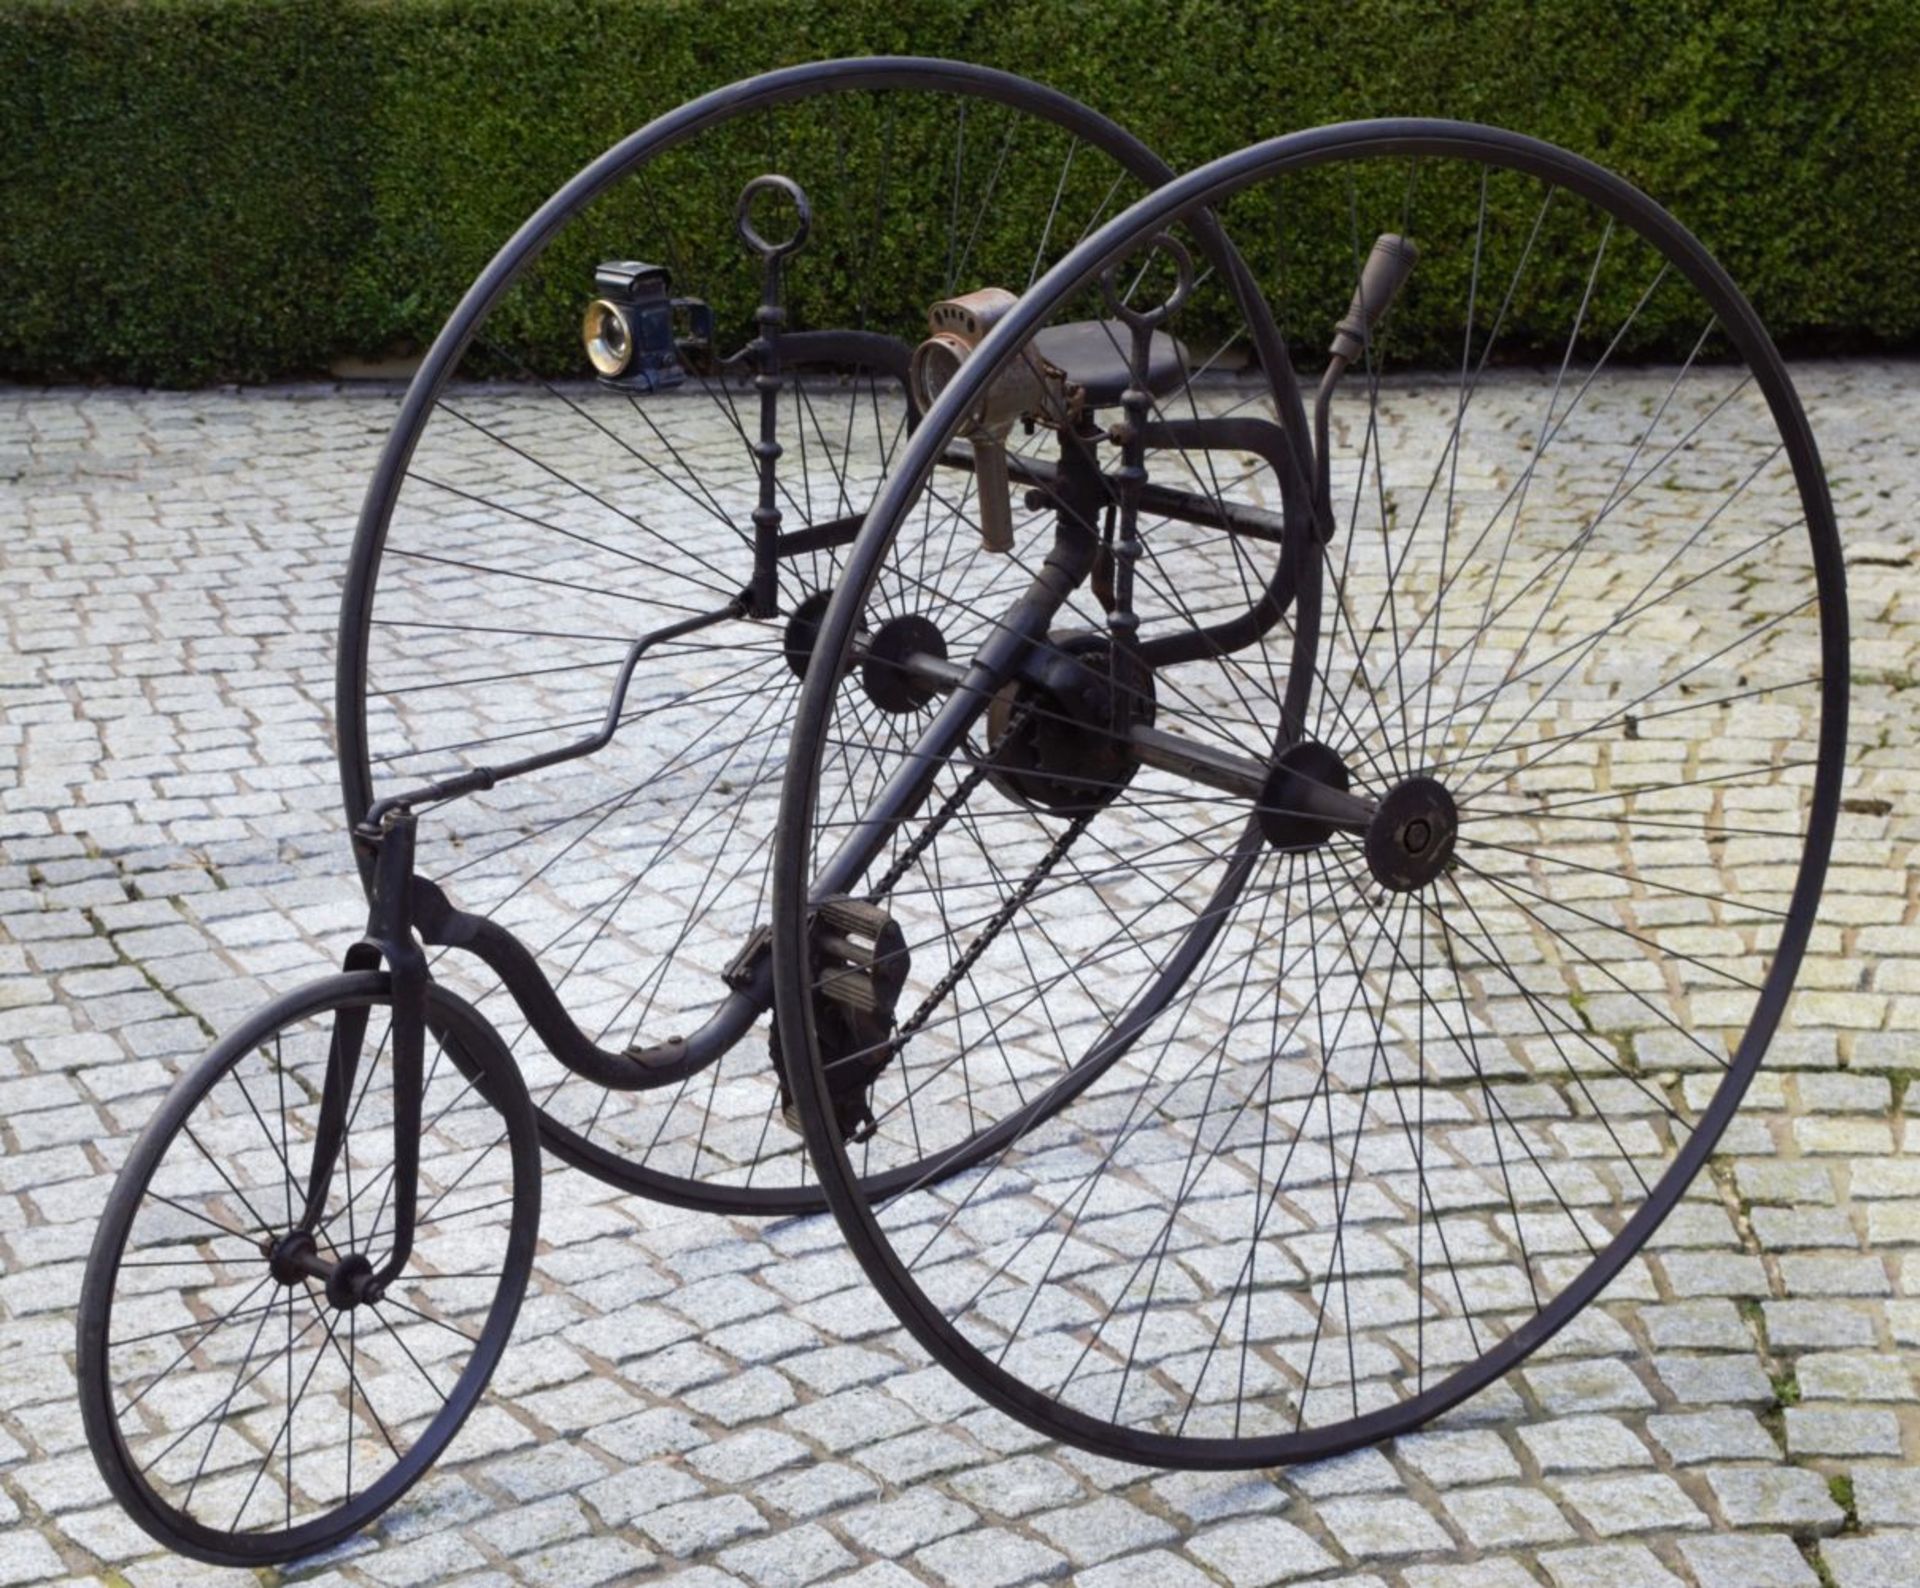 TRI-CYCLE, ATTRIBUTED TO HILLMAN, HERBERT AND COOPER, COVENTRY